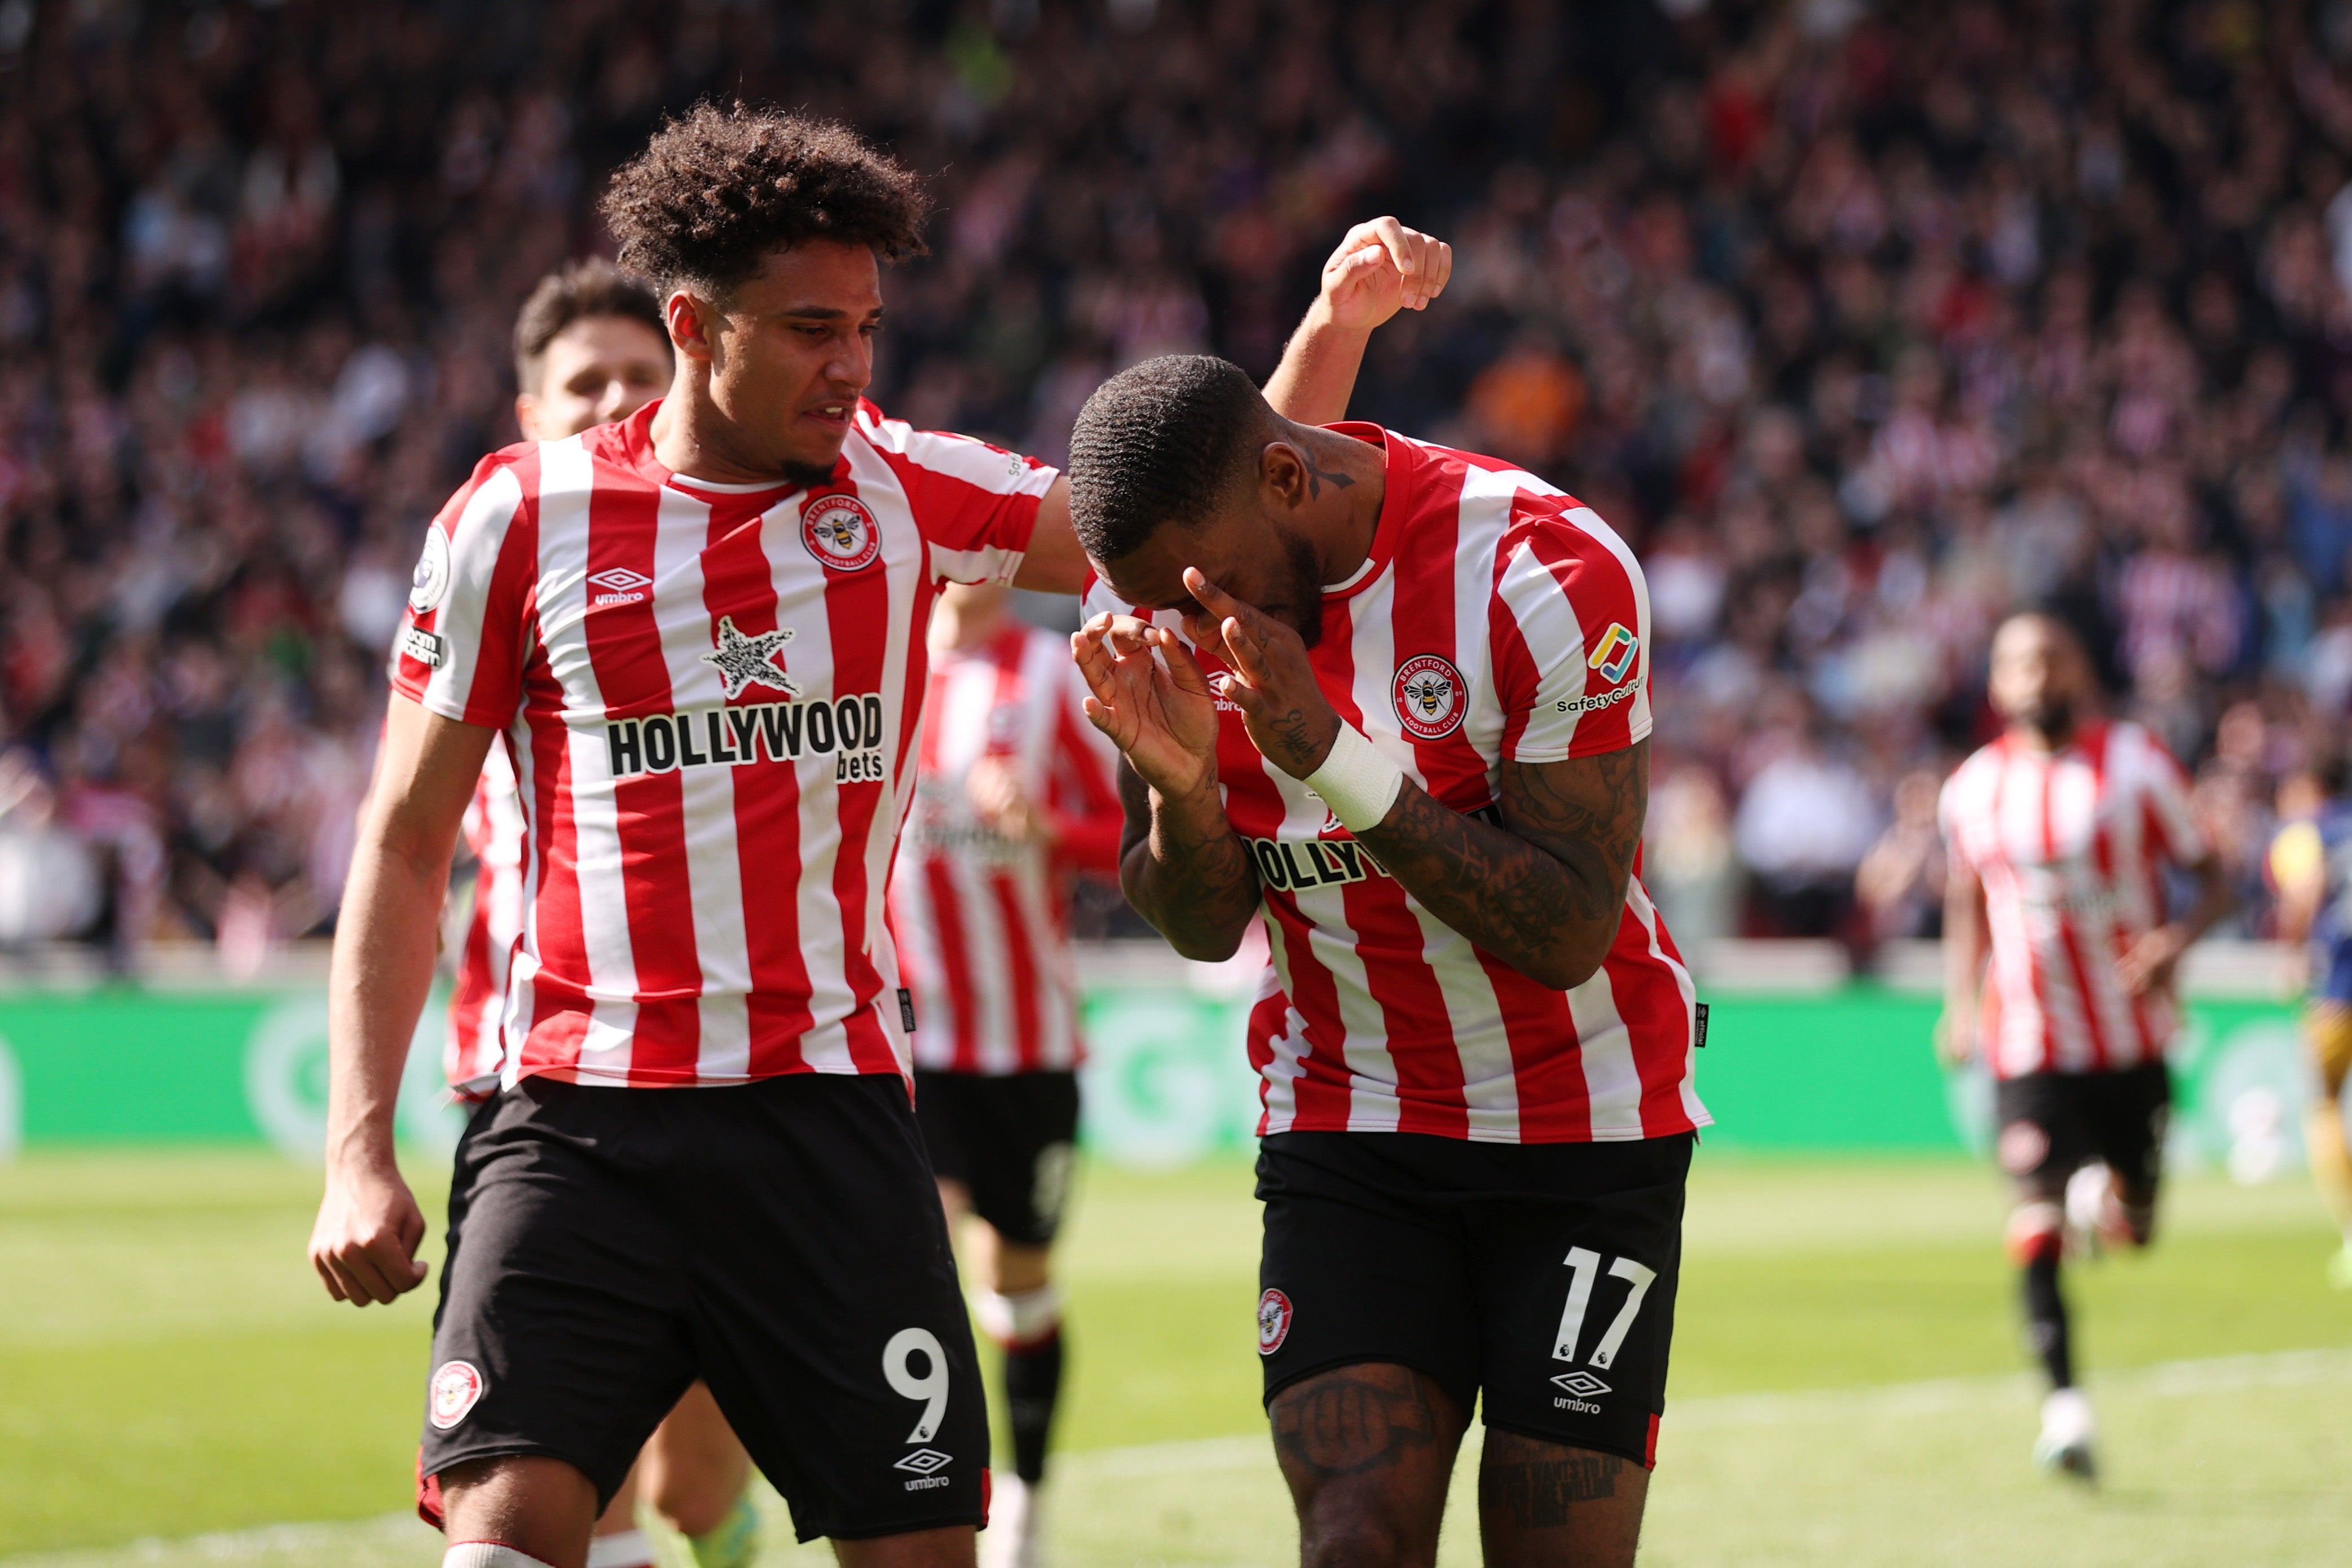 Brentford are one of eight Premier League clubs with a gambling company as their shirt sponsor